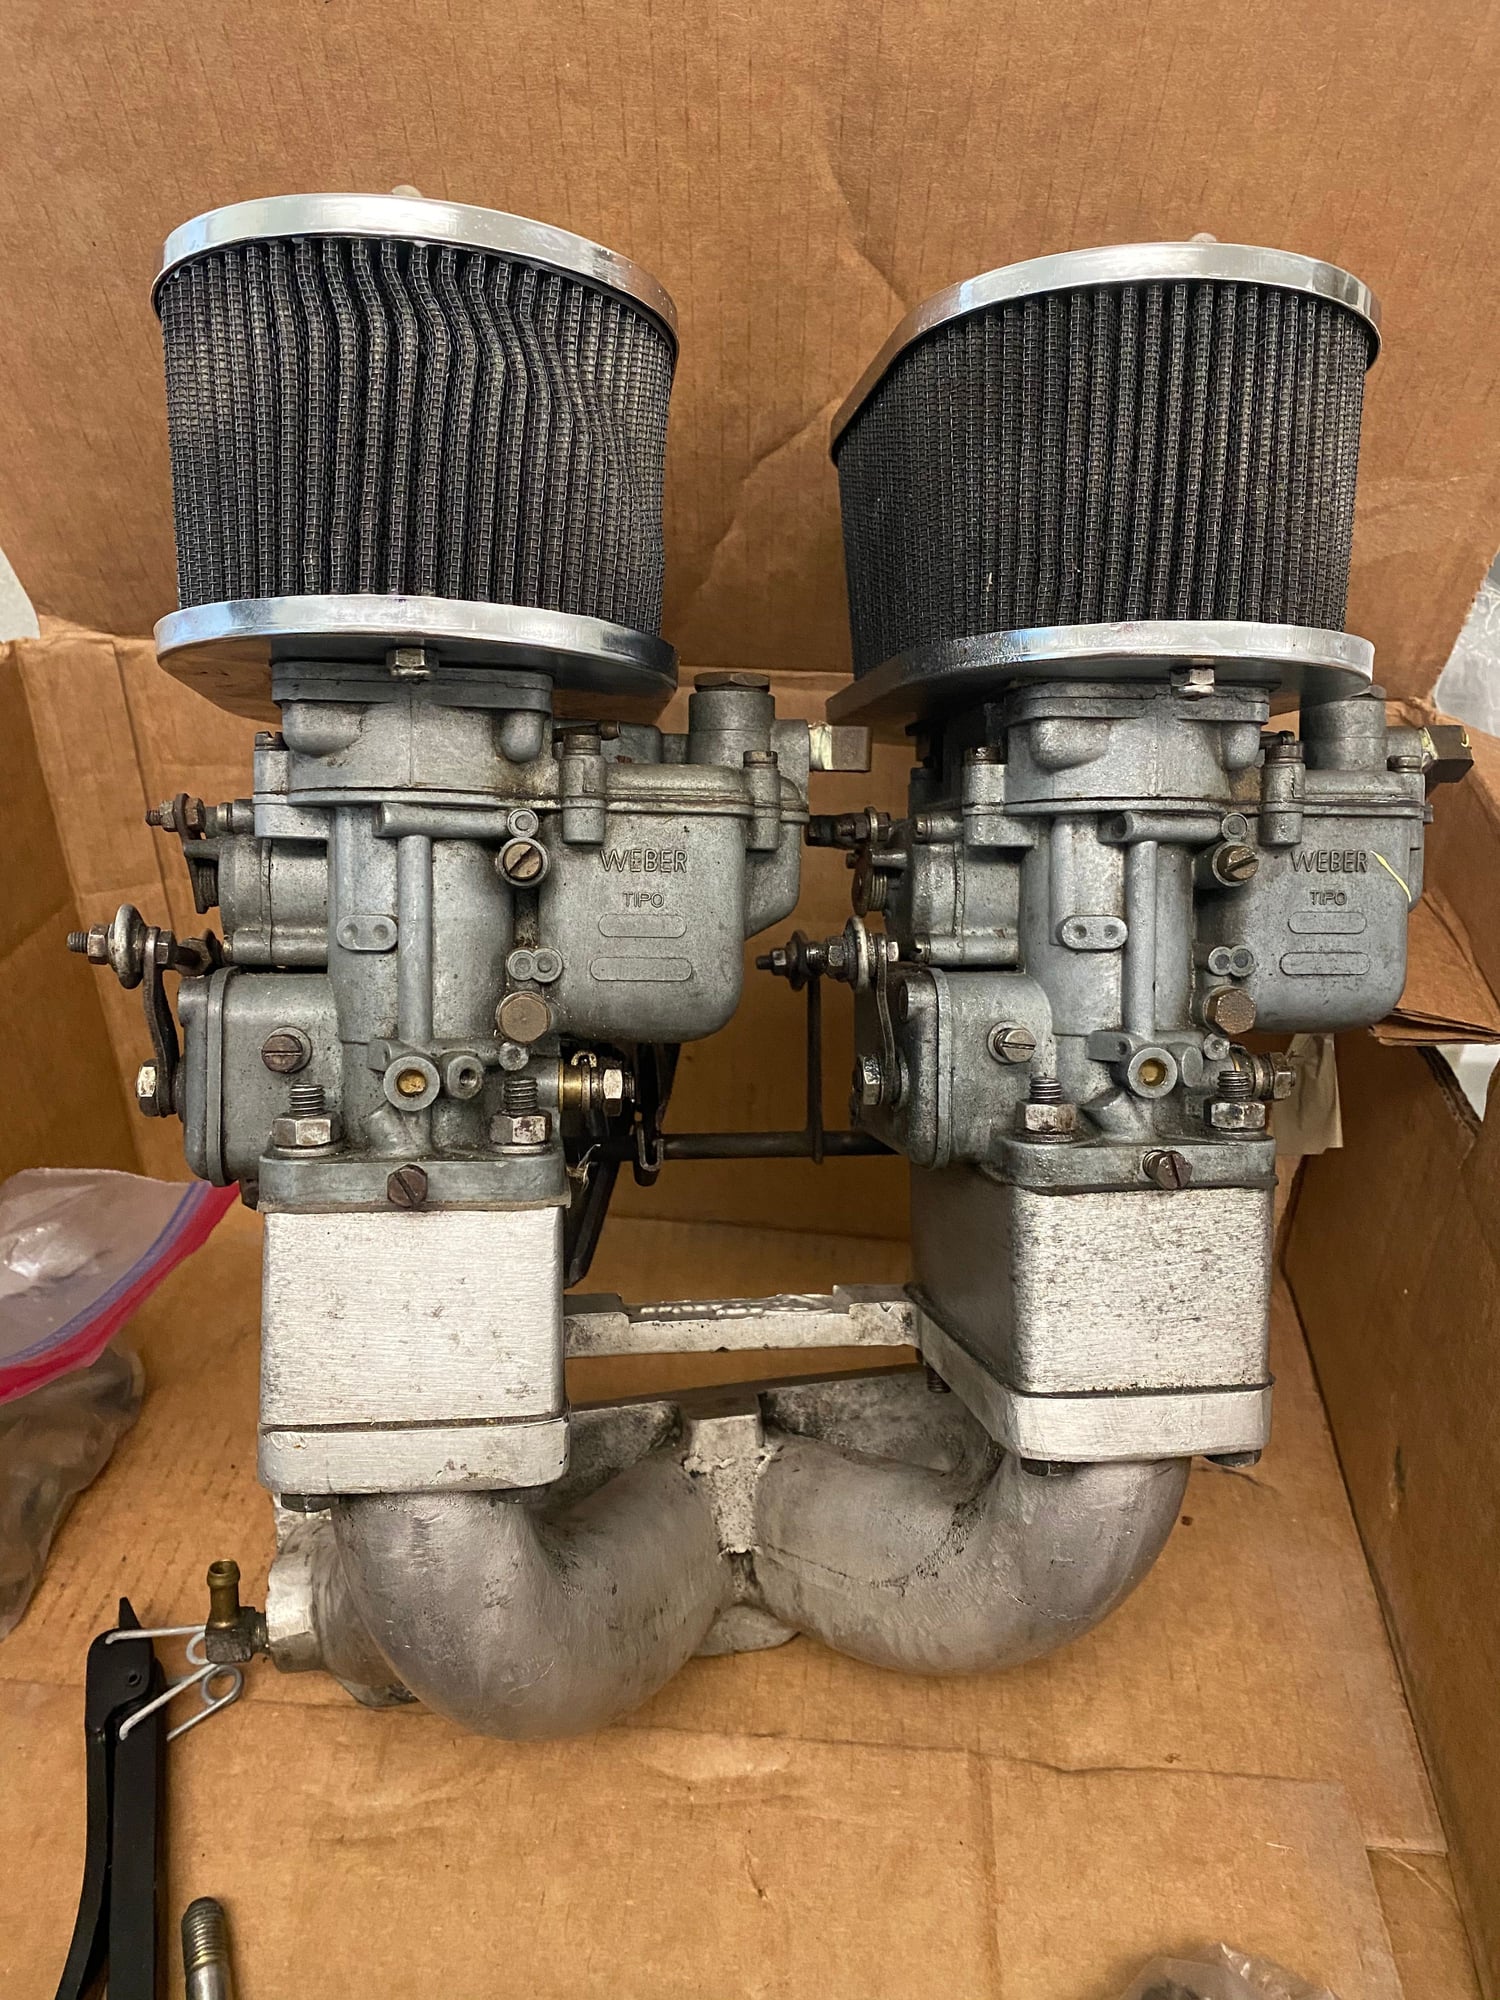 Engine - Intake/Fuel - 36 dcd weber - Used - 1981 to 1985 Mazda RX-7 - 1981 to 1985 Mazda RX-7 - Fort Campbell, KY 42223, United States